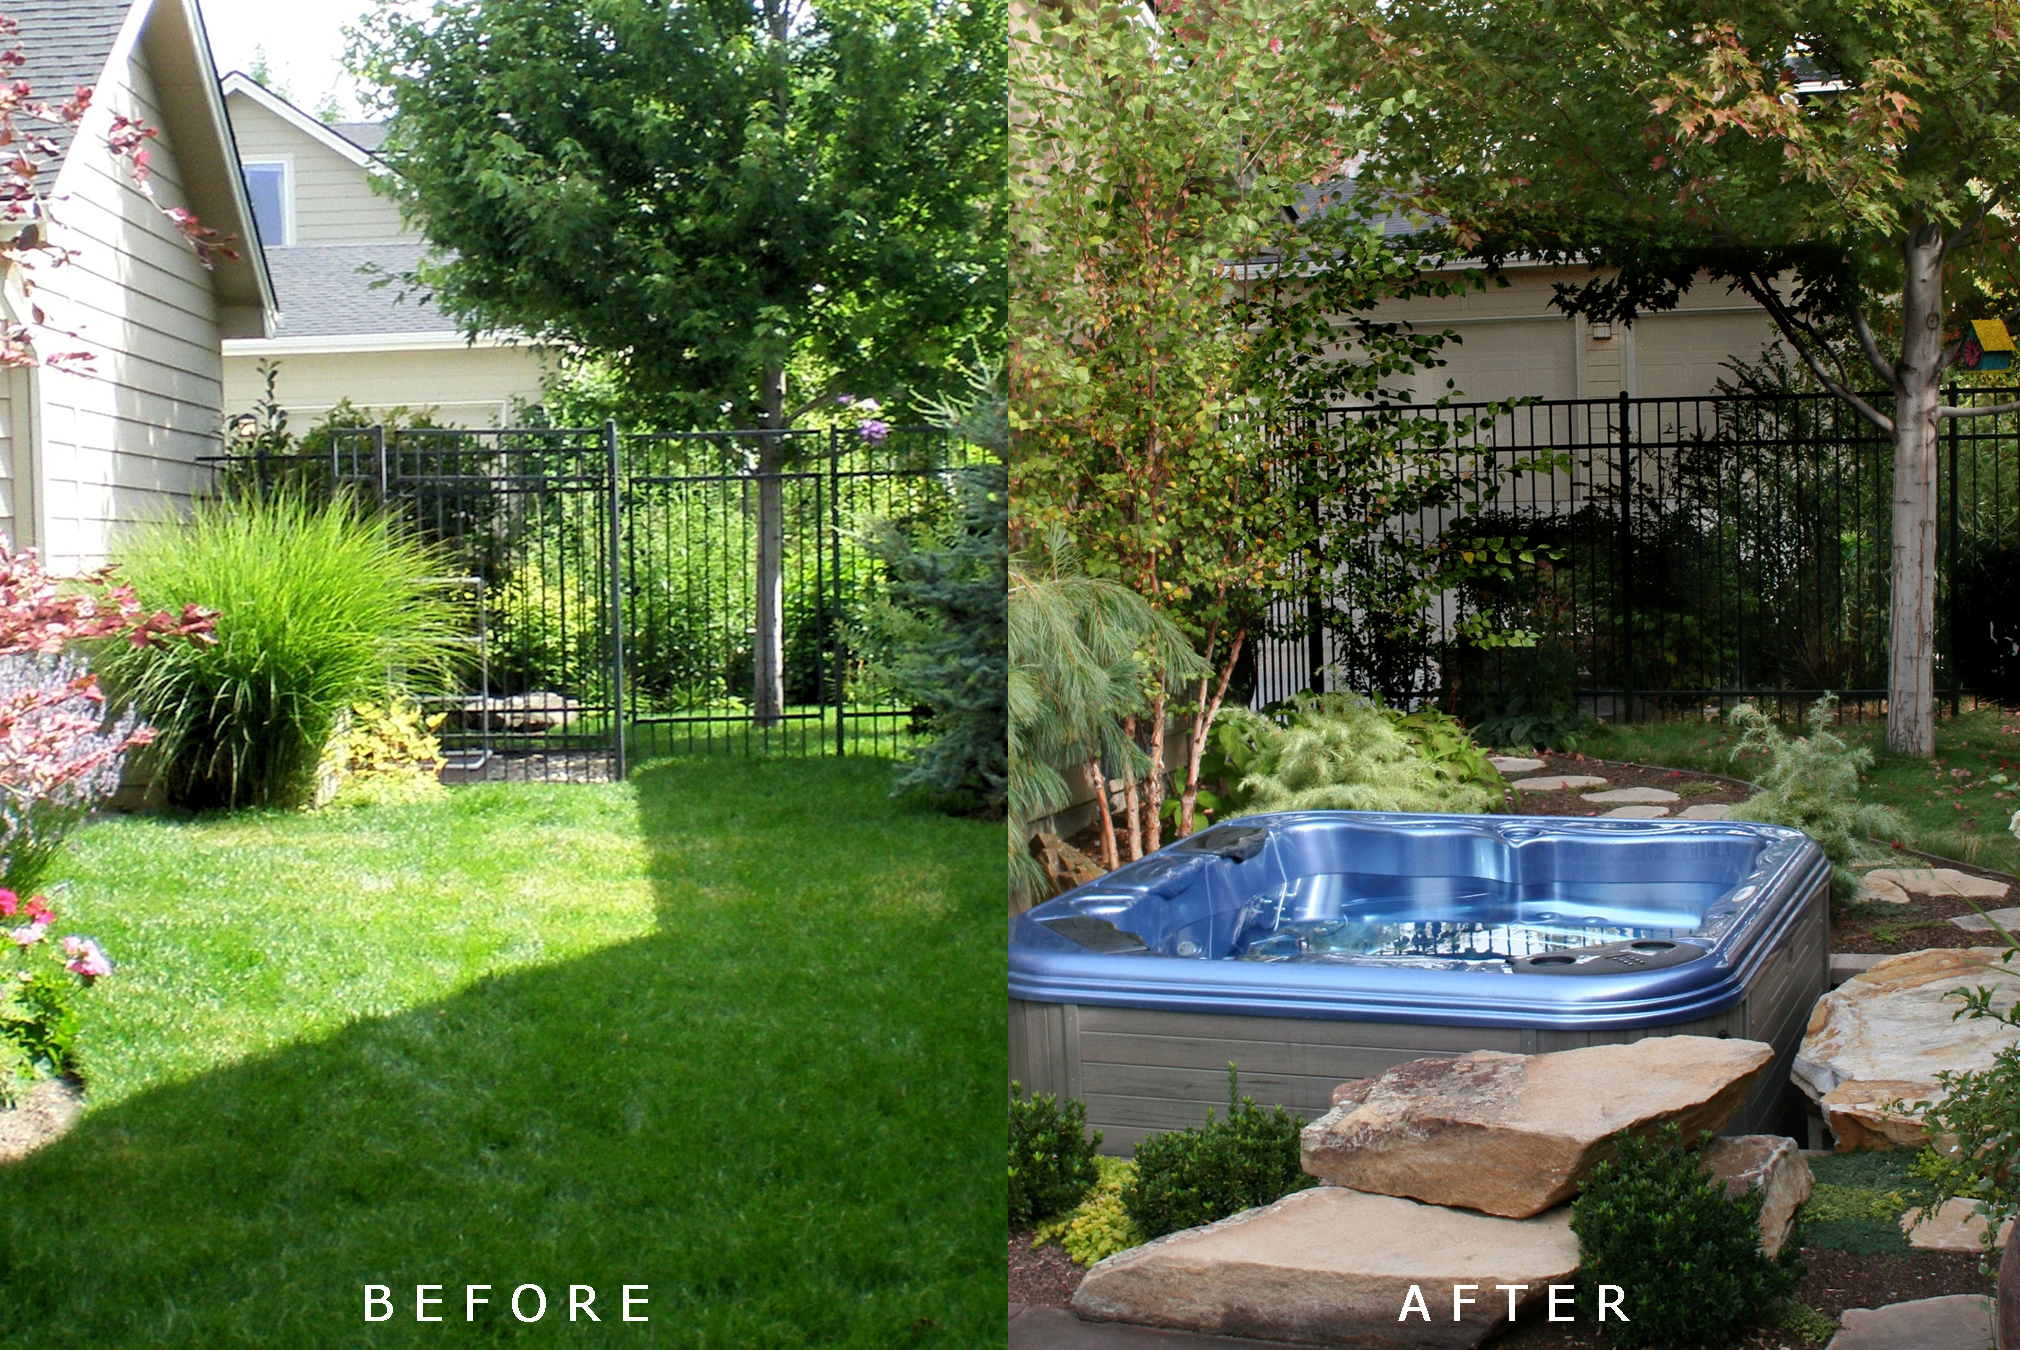 Barrios Residence: Before/After | The Garden Artist Boise, ID